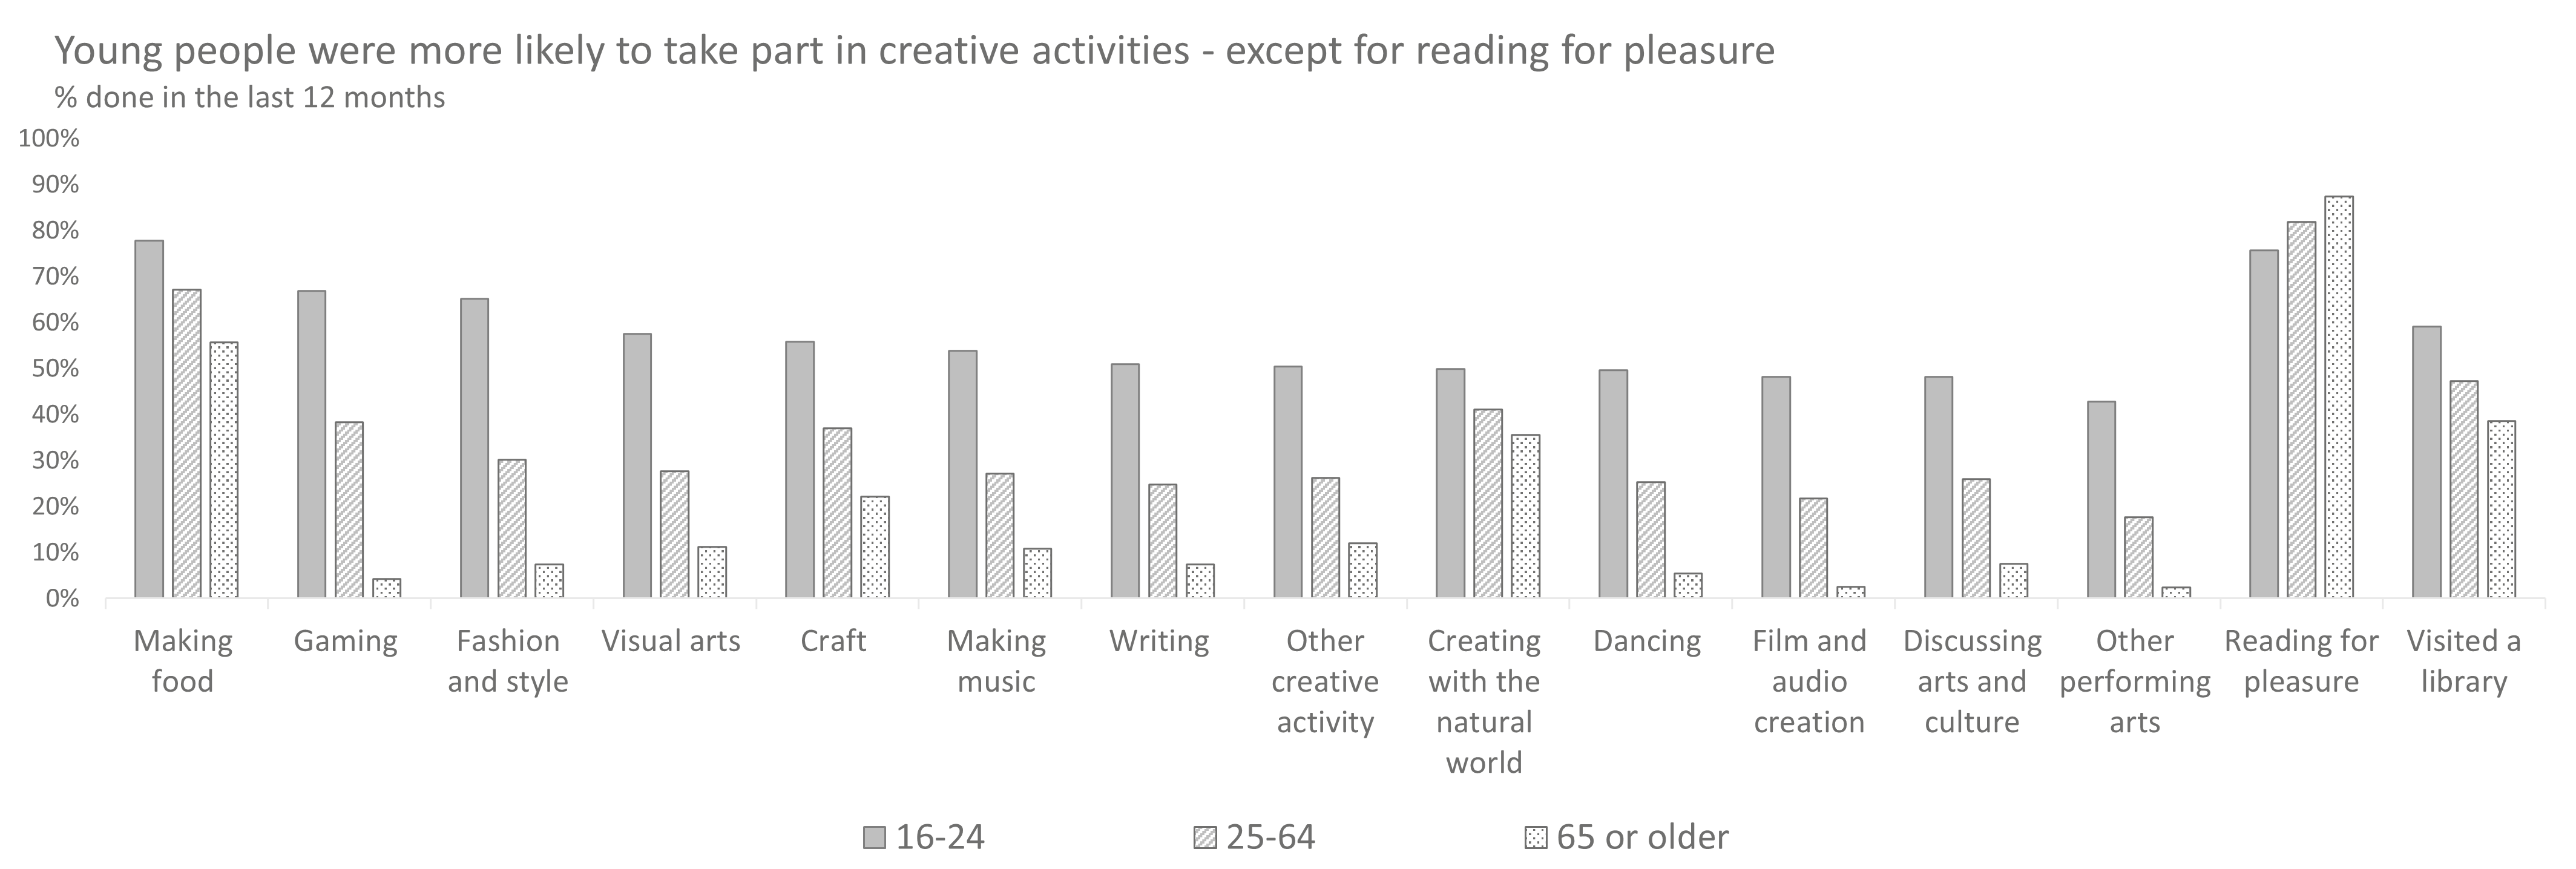 Creative Activities by Age.png